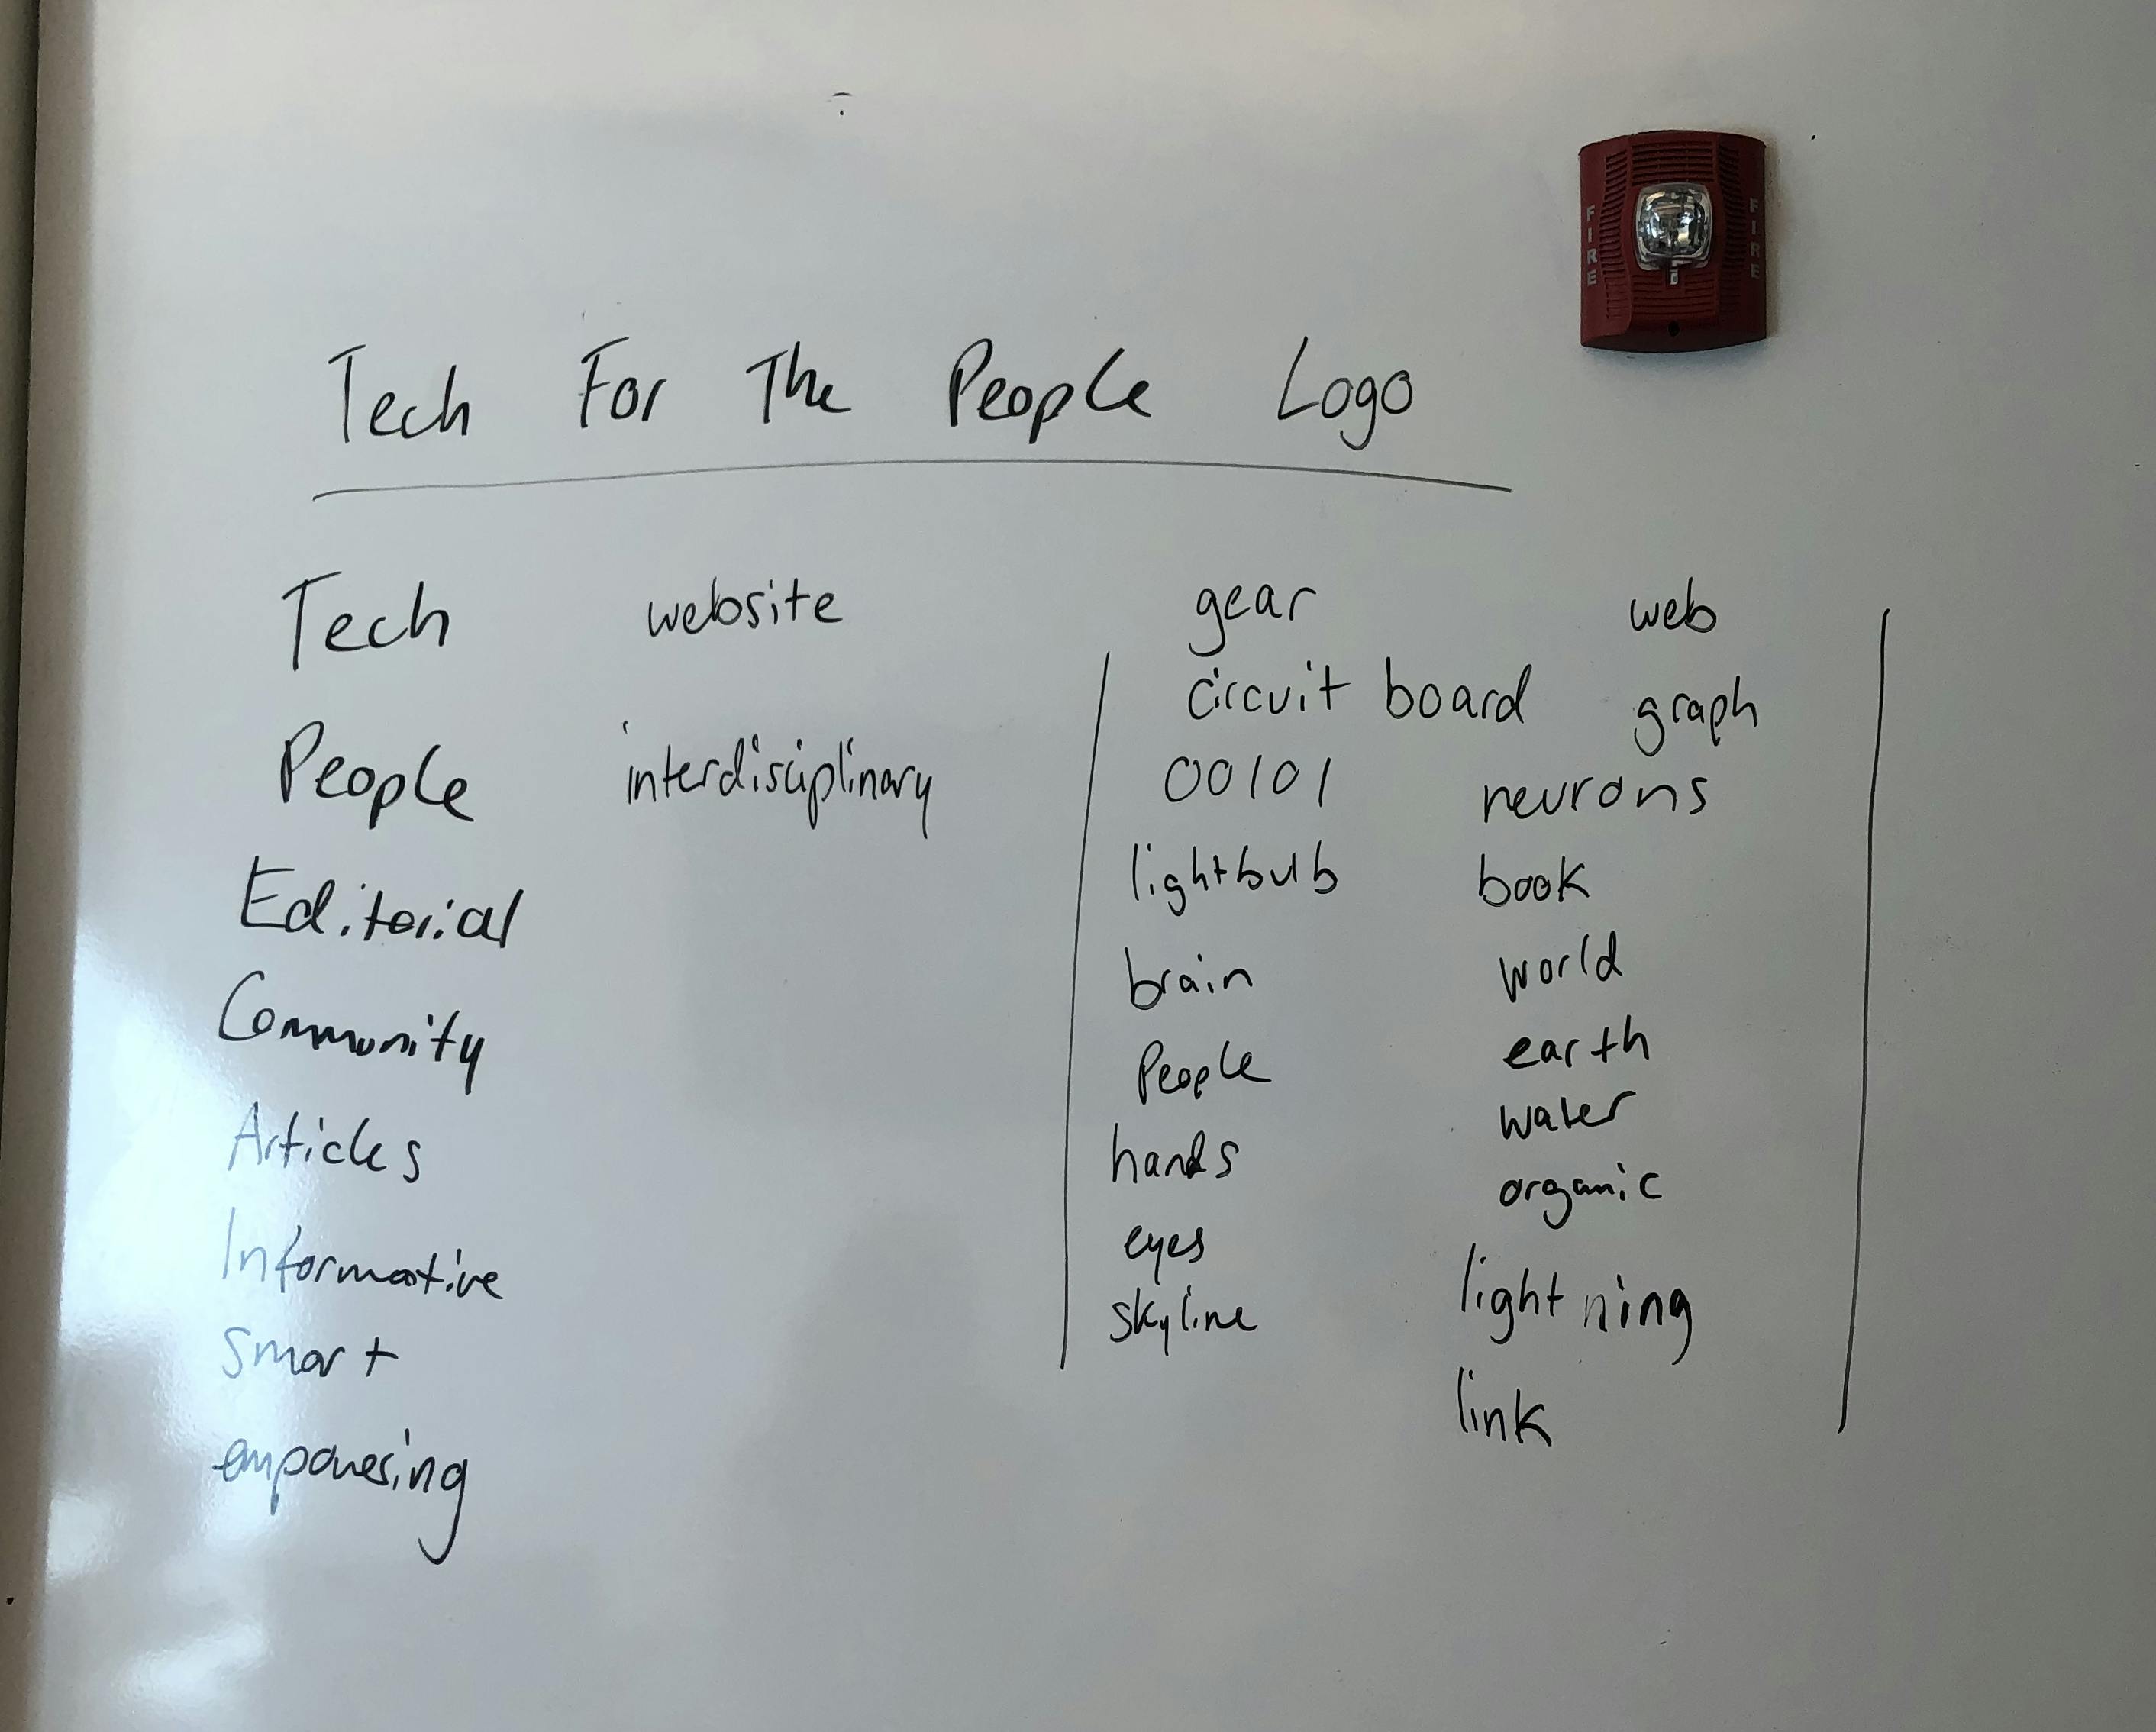 Logo brainstorm from a team whiteboarding session.